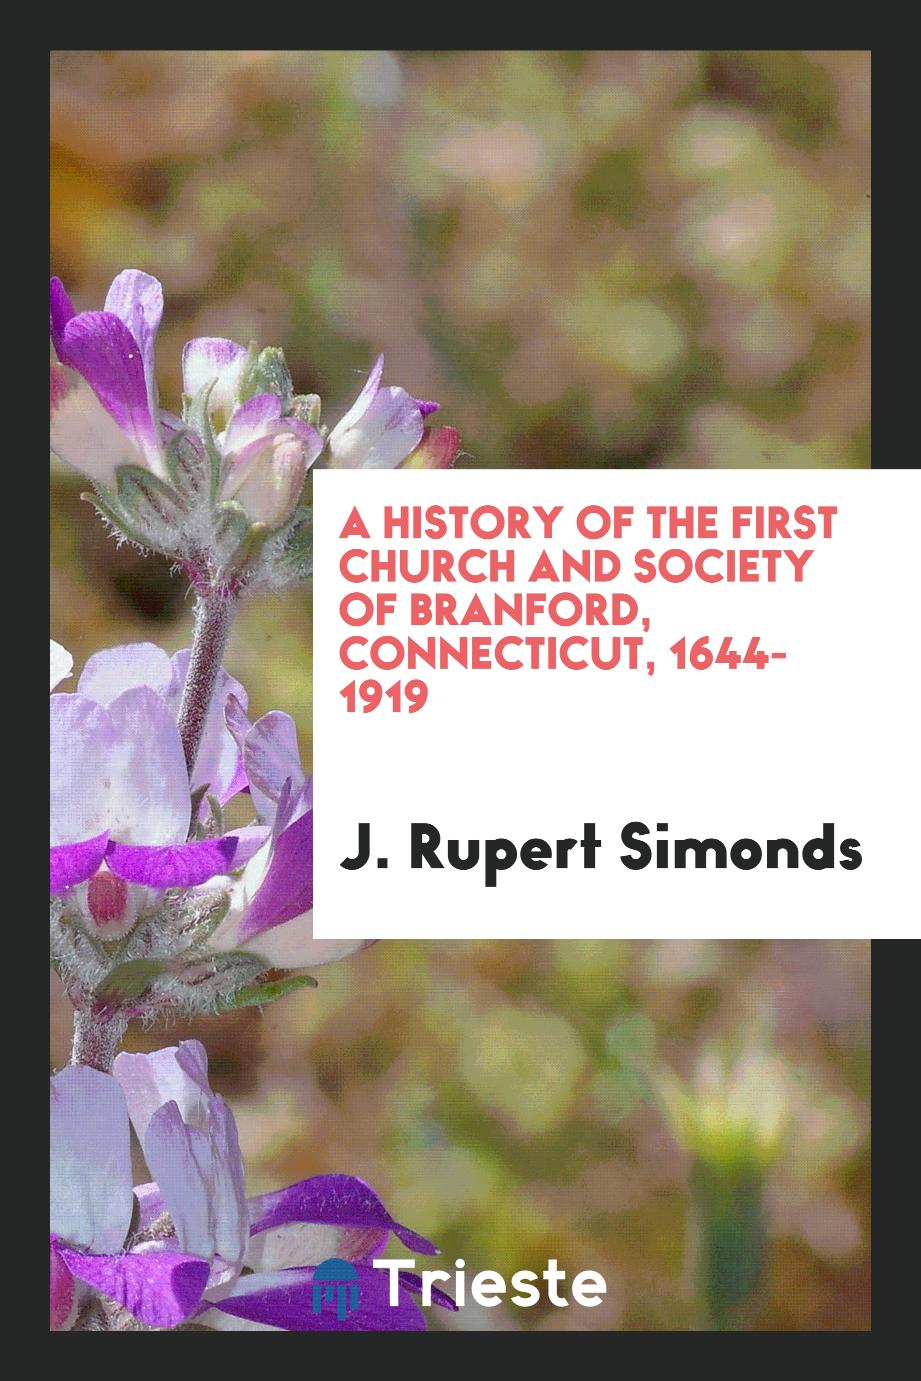 J. Rupert Simonds - A history of the First Church and Society of Branford, Connecticut, 1644-1919